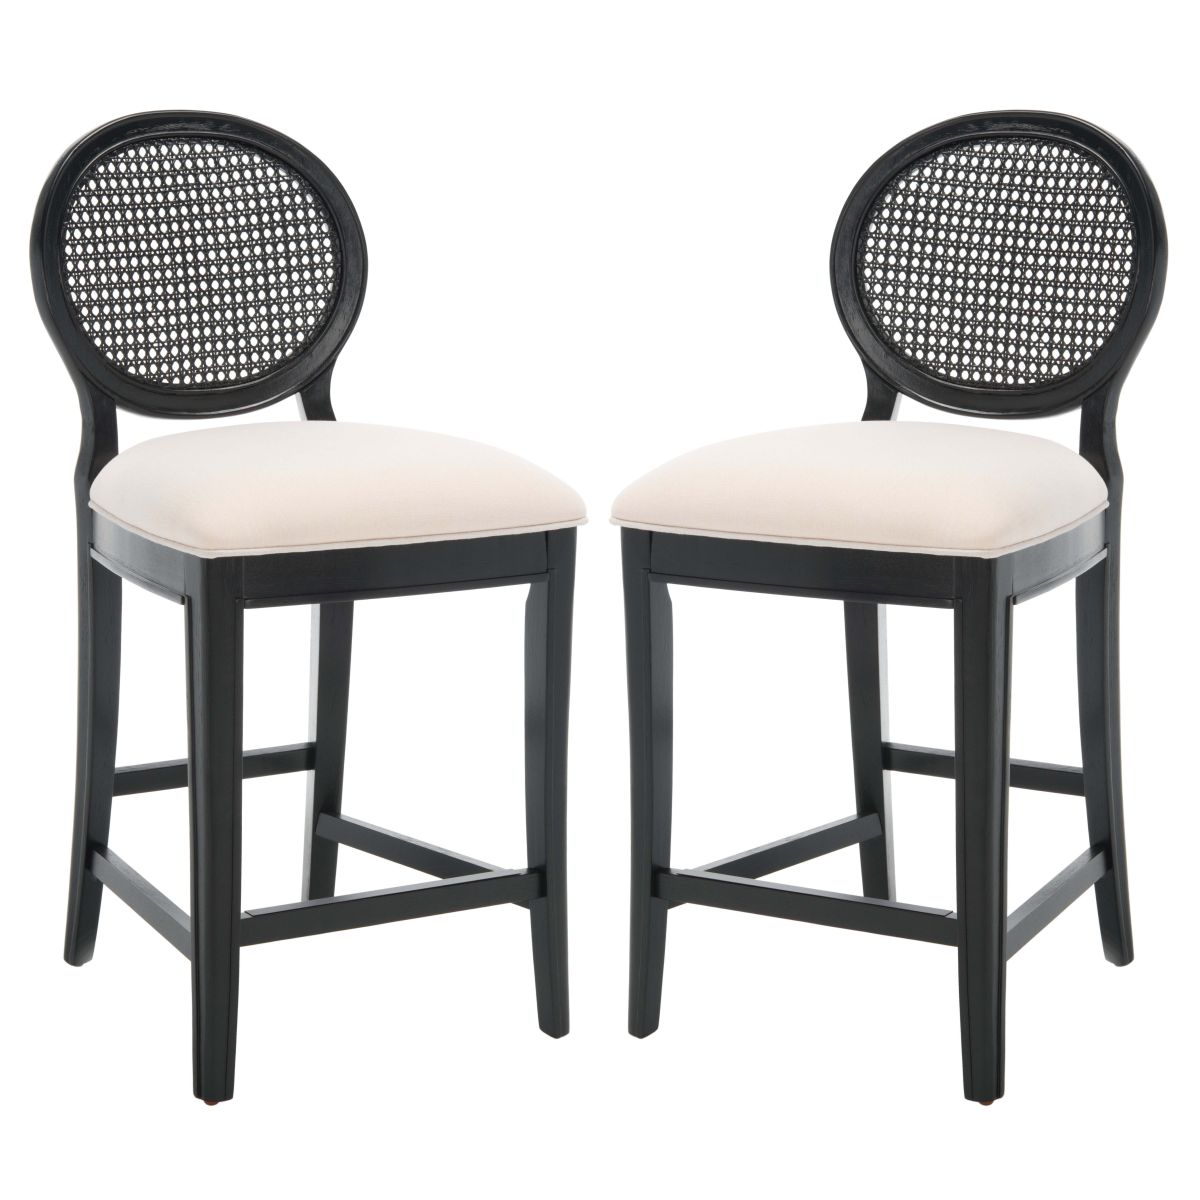 Safavieh Couture Karlee Rattan Back Counter Stool(Set of 2)